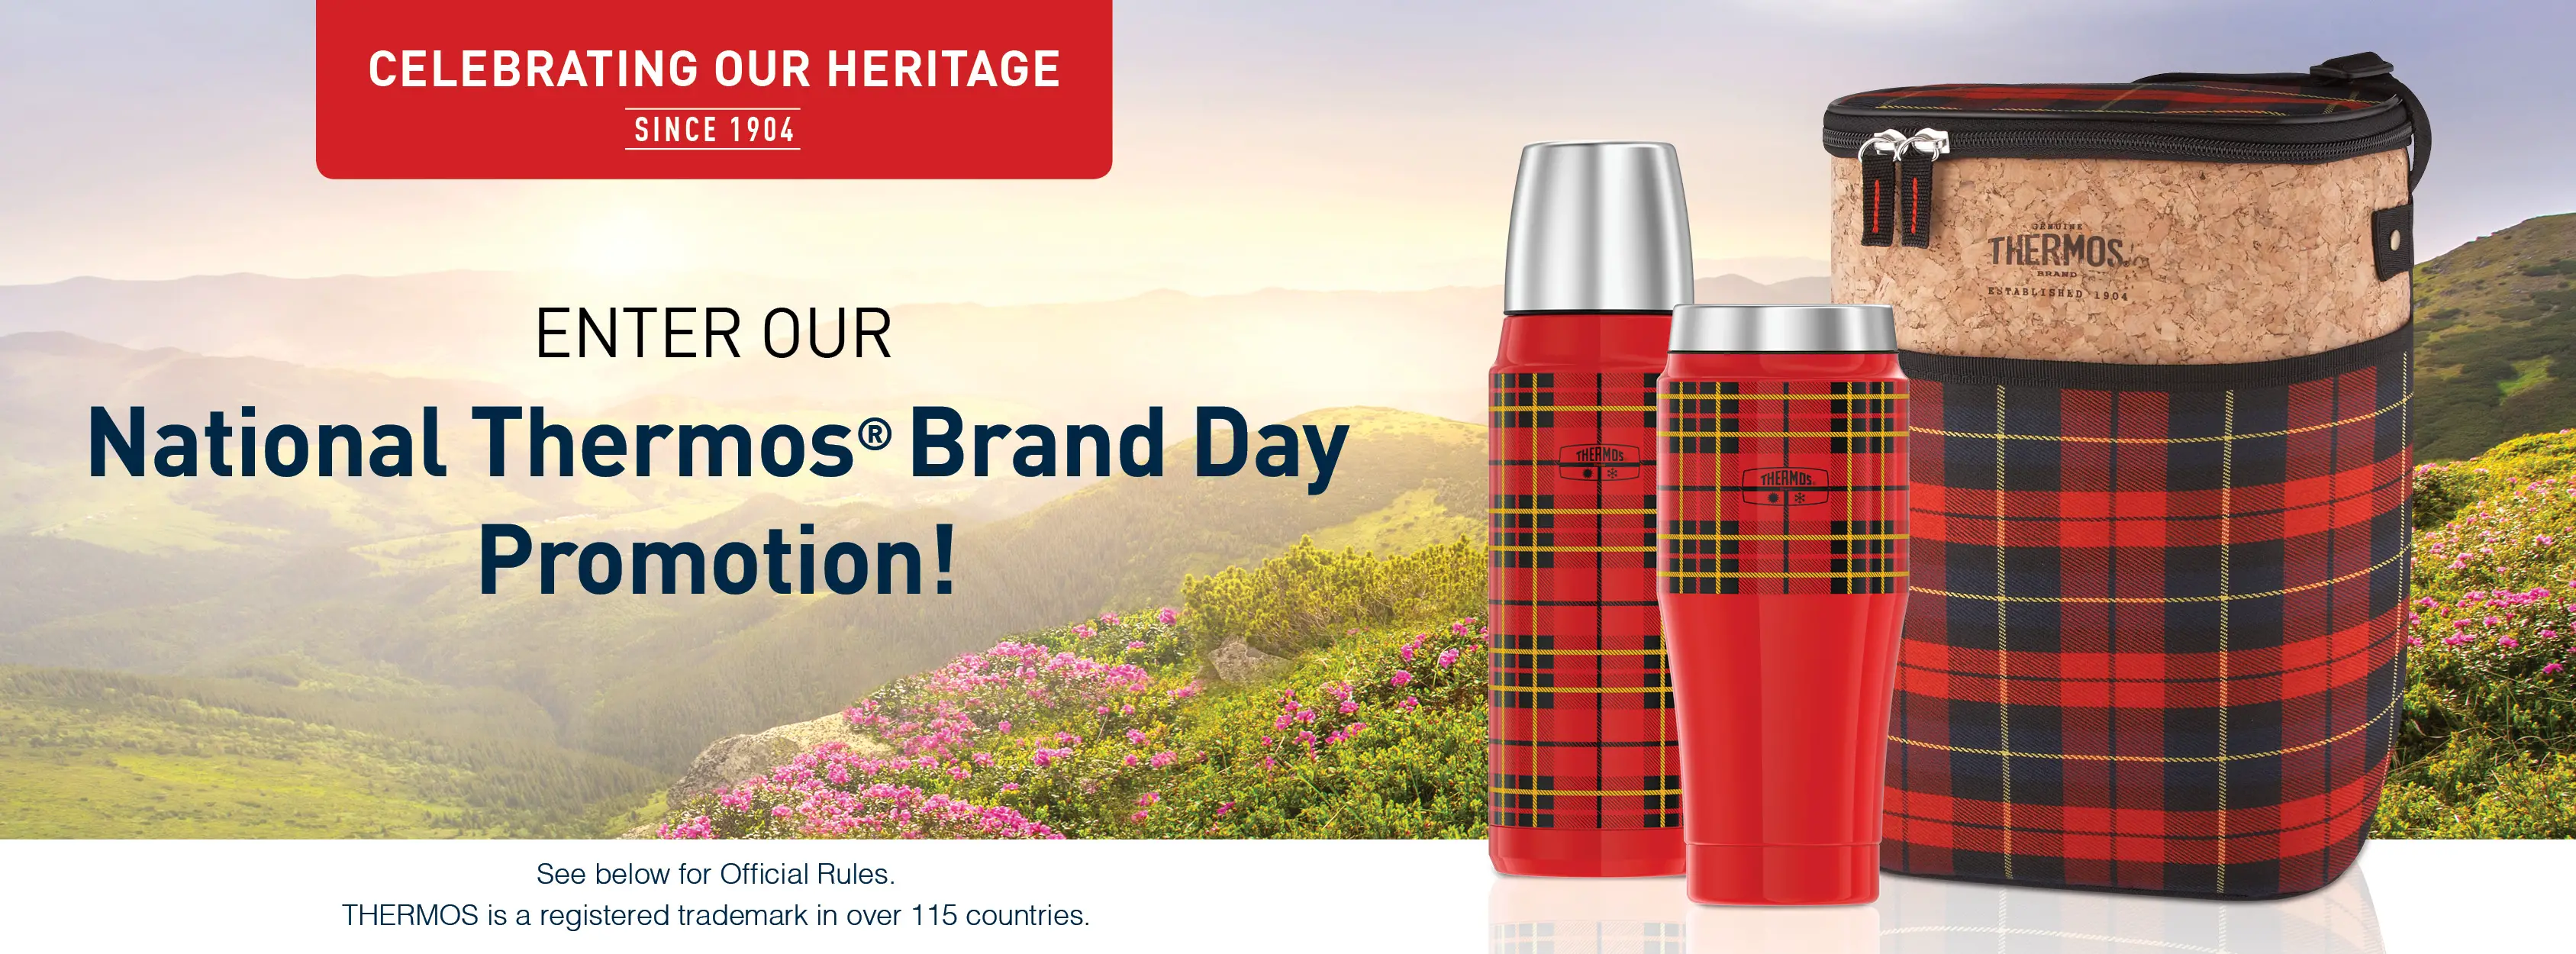 QUICK ENDING! National Thermos Day Giveaway